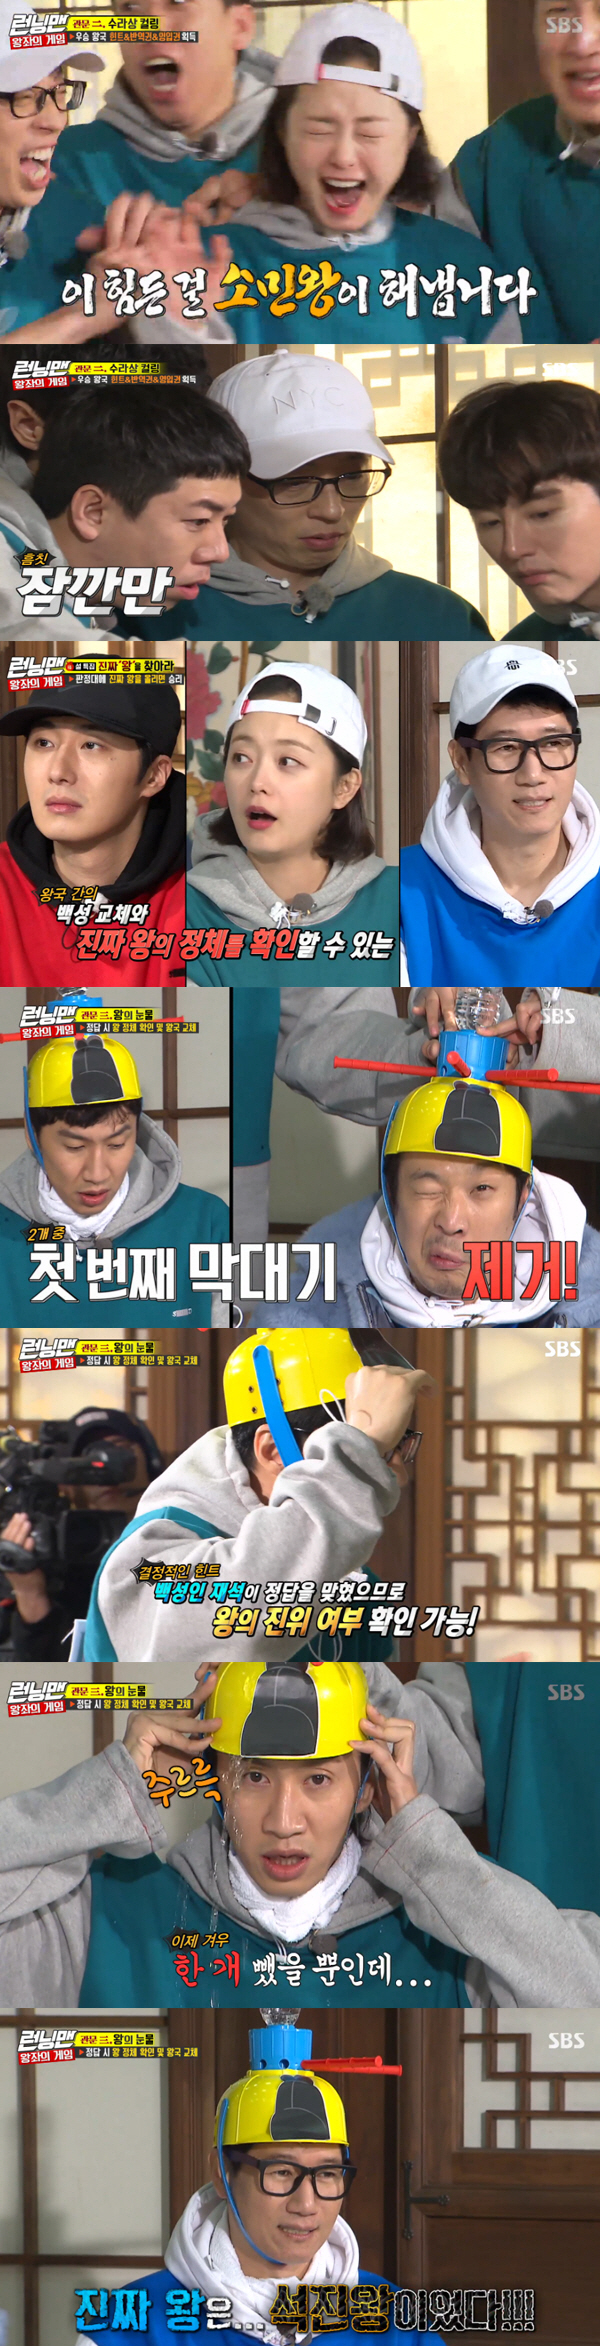 Running Man Ji Suk-jin was the real kingOn SBS Running Man broadcasted on the 3rd, Hate Jung Il-woo, Go Ah-ra, Kwon Yul and Park Hoon appeared as guests and Game of Thrones was held.On this day, the members cheered on the appearance of Jung Il-woo, Go Ah-ra, Kwon Yul and Park Hoon.Jung Il-woo, who appeared in the first entertainment show as Running Man after the cancellation, said, The historical drama is the fourth time. It is comfortable for hanbok.Yoo Jae-Suk, while introducing Kwon Yul, asked for a song, saying, It became a hot topic with my eardrum purification singing ability.Kwon Yul was excited by singing alone even in a sudden request and caused laughter.Park, who first appeared in the entertainment with Running Man, said, My heart is going to burst. He said, I played the role of the street king Dalmun in the drama.Its a power blogger if you hit it these days, he said, laughing.In particular, he mentioned his friendship with Ji Suk-jin, who appeared on the radio of Ji Suk-jin, while Ji Suk-jin did not remember Park, which embarrassed Park.In addition, Park talked about his relationship with Yoo Jae-Suk in the past and said, I was greatly impressed by Yoo Jae-Suk.He said, Everyone was very excited because Yoo Jae-Suk came to the musical scene that appeared with Jung Jun-ha one day.I was the only one who was encouraging and greeting each of the staff. I was really impressed by that. When I raised the real king, I divided it into three teams among the winners and started a full-scale mission.Through the first mission, Jeon So-min, Kwon Yul, Yoo Jae-Suk, and Yang Se-chan of the Jeon So-min kingdom won the championship, winning hints, treason and recruitment rights.So, Jeon So-min recruited Lee Kwang-soo and handed over the rebellion to Kwon Yul.The second mission is a sura-sang curling, which pushes the lid to acquire the menu.With the performance of Jeon So-min, the kingdom of Jeon So-min won again, hinting and Park Hoon, and the rebellion was handed to Yoo Jae-Suk.The last mission to confirm the identity of the people and the real king is to solve the quiz and remove the stick of the other party and win when the water comes out.Among them, the people, Yoo Jae-Suk, answered the correct answer and confirmed the authenticity of the king.He asked, Do you have a king among Ji Suk-jin and Jung Il-woo? and was embarrassed by the crews answer to Yes.Kim Jong Kook, who answered the correct answer, asked, Do you have a king among Jung Il-woo and Jeon So-min? The production team replied, No.This revealed the real king as Ji Suk-jin.Yoo Jae-Suk and Kwon Yul, who have treason rights, moved to the Ji Suk-jin team, and other members except Ji Suk-jin kingdom members won the water bomb penalty.